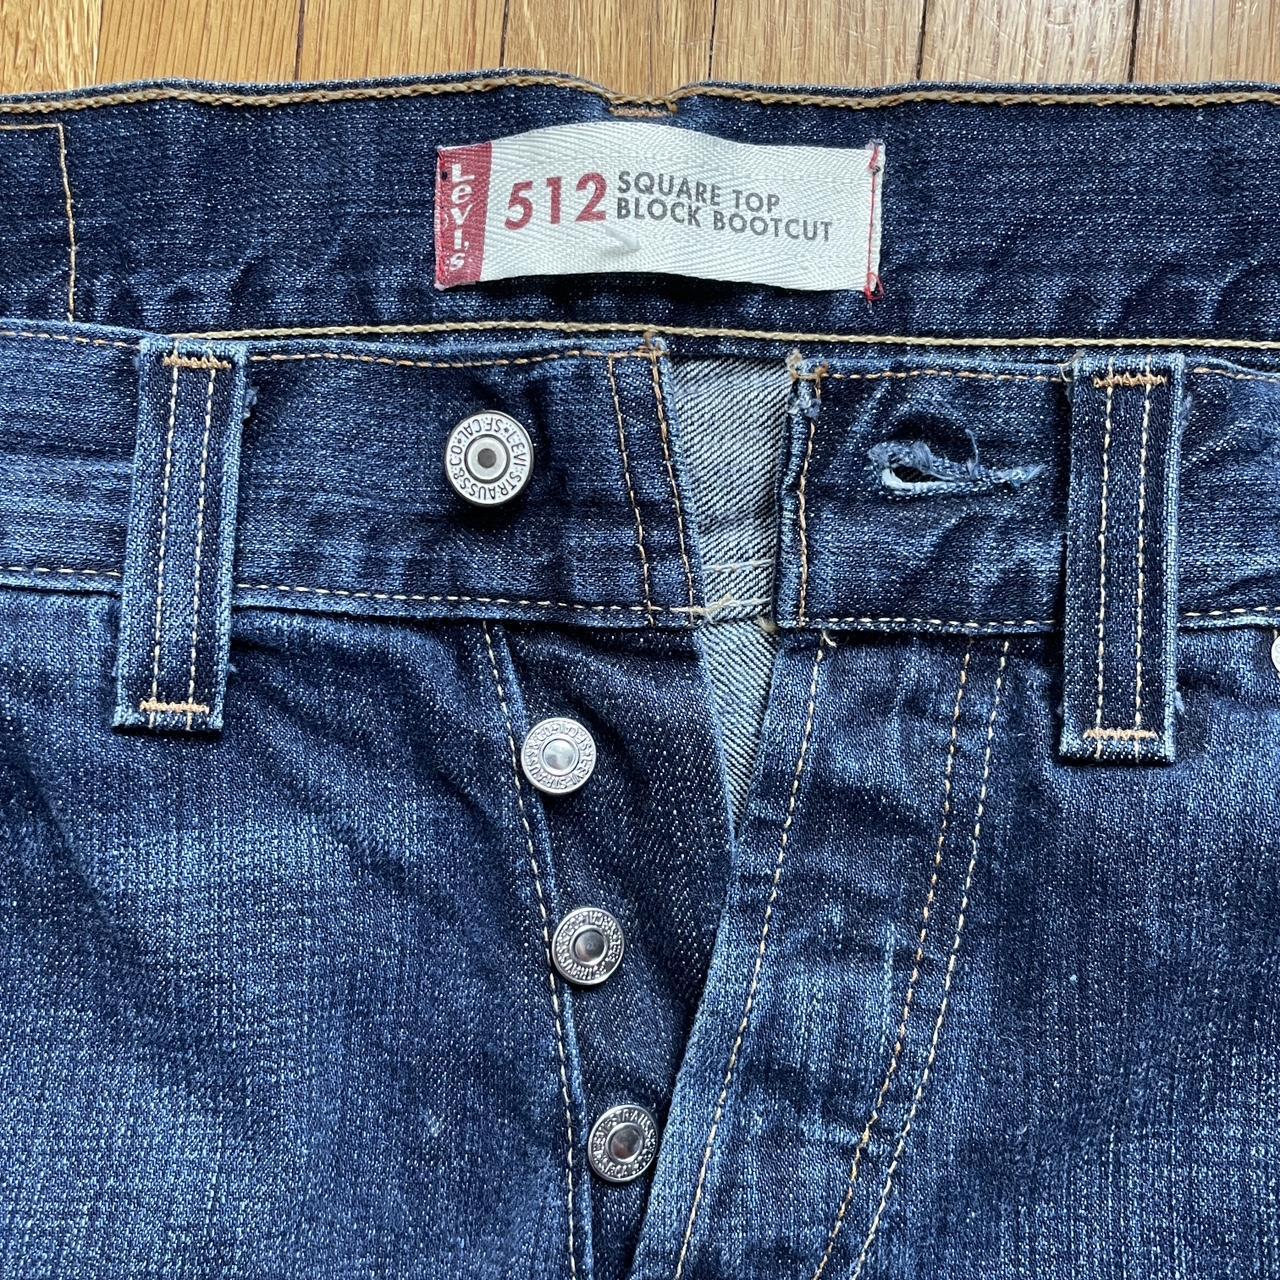 Levi’s 512 bootcut denim Made in South Africa Size:... - Depop